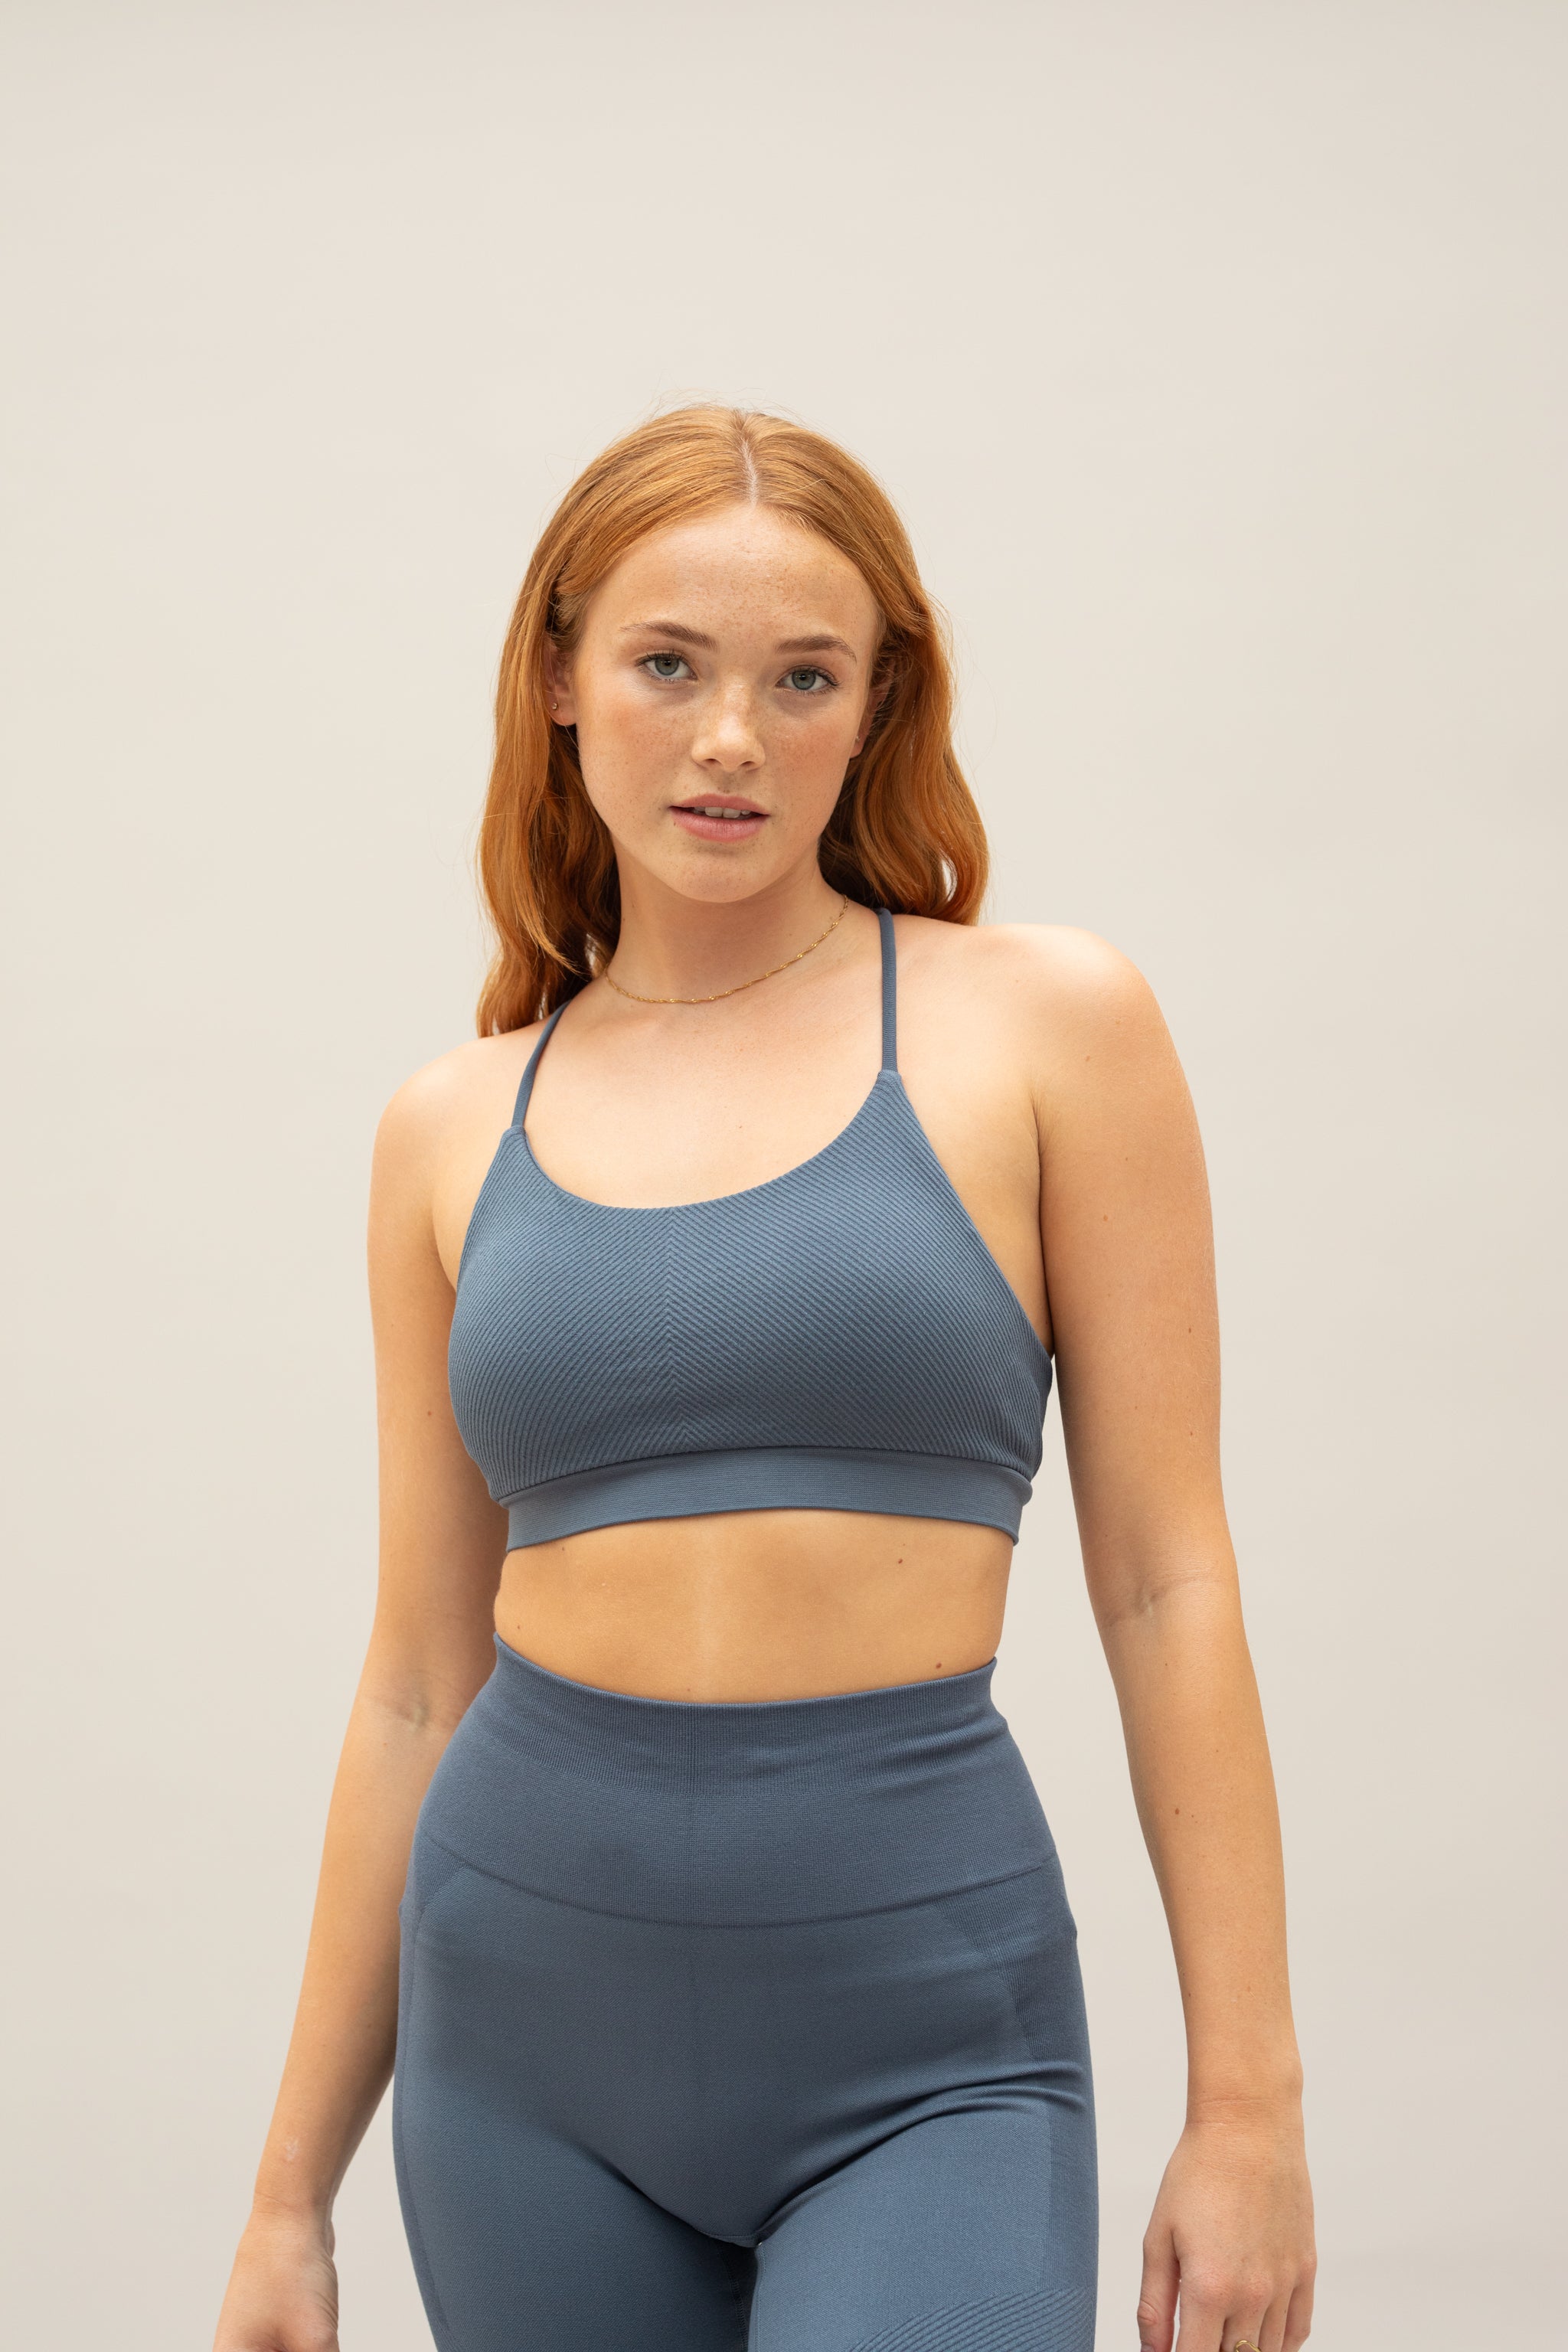 Model wearing blue supportive sports bra and blue cropped leggings for sustainable women activewear brand, Jilla.